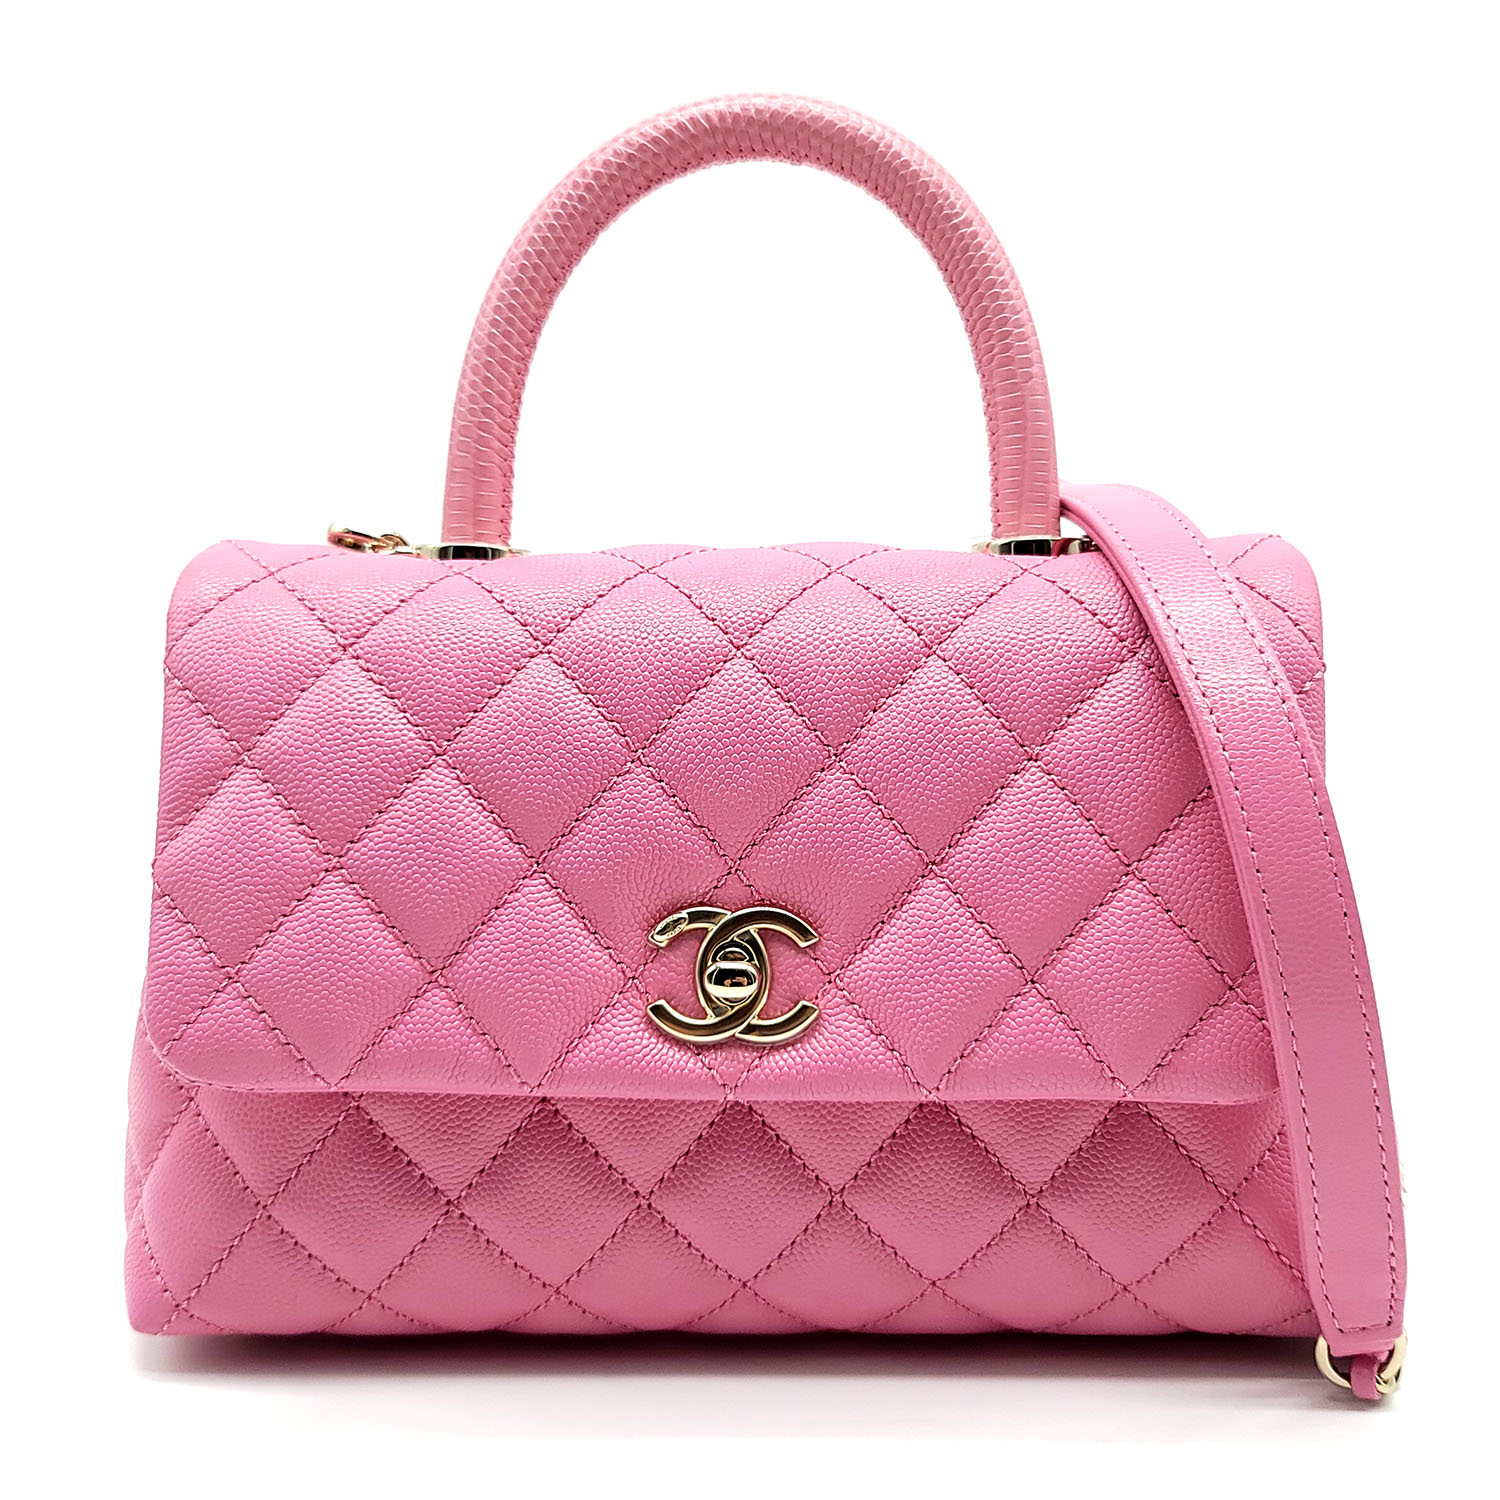 mini quilted chanel bag